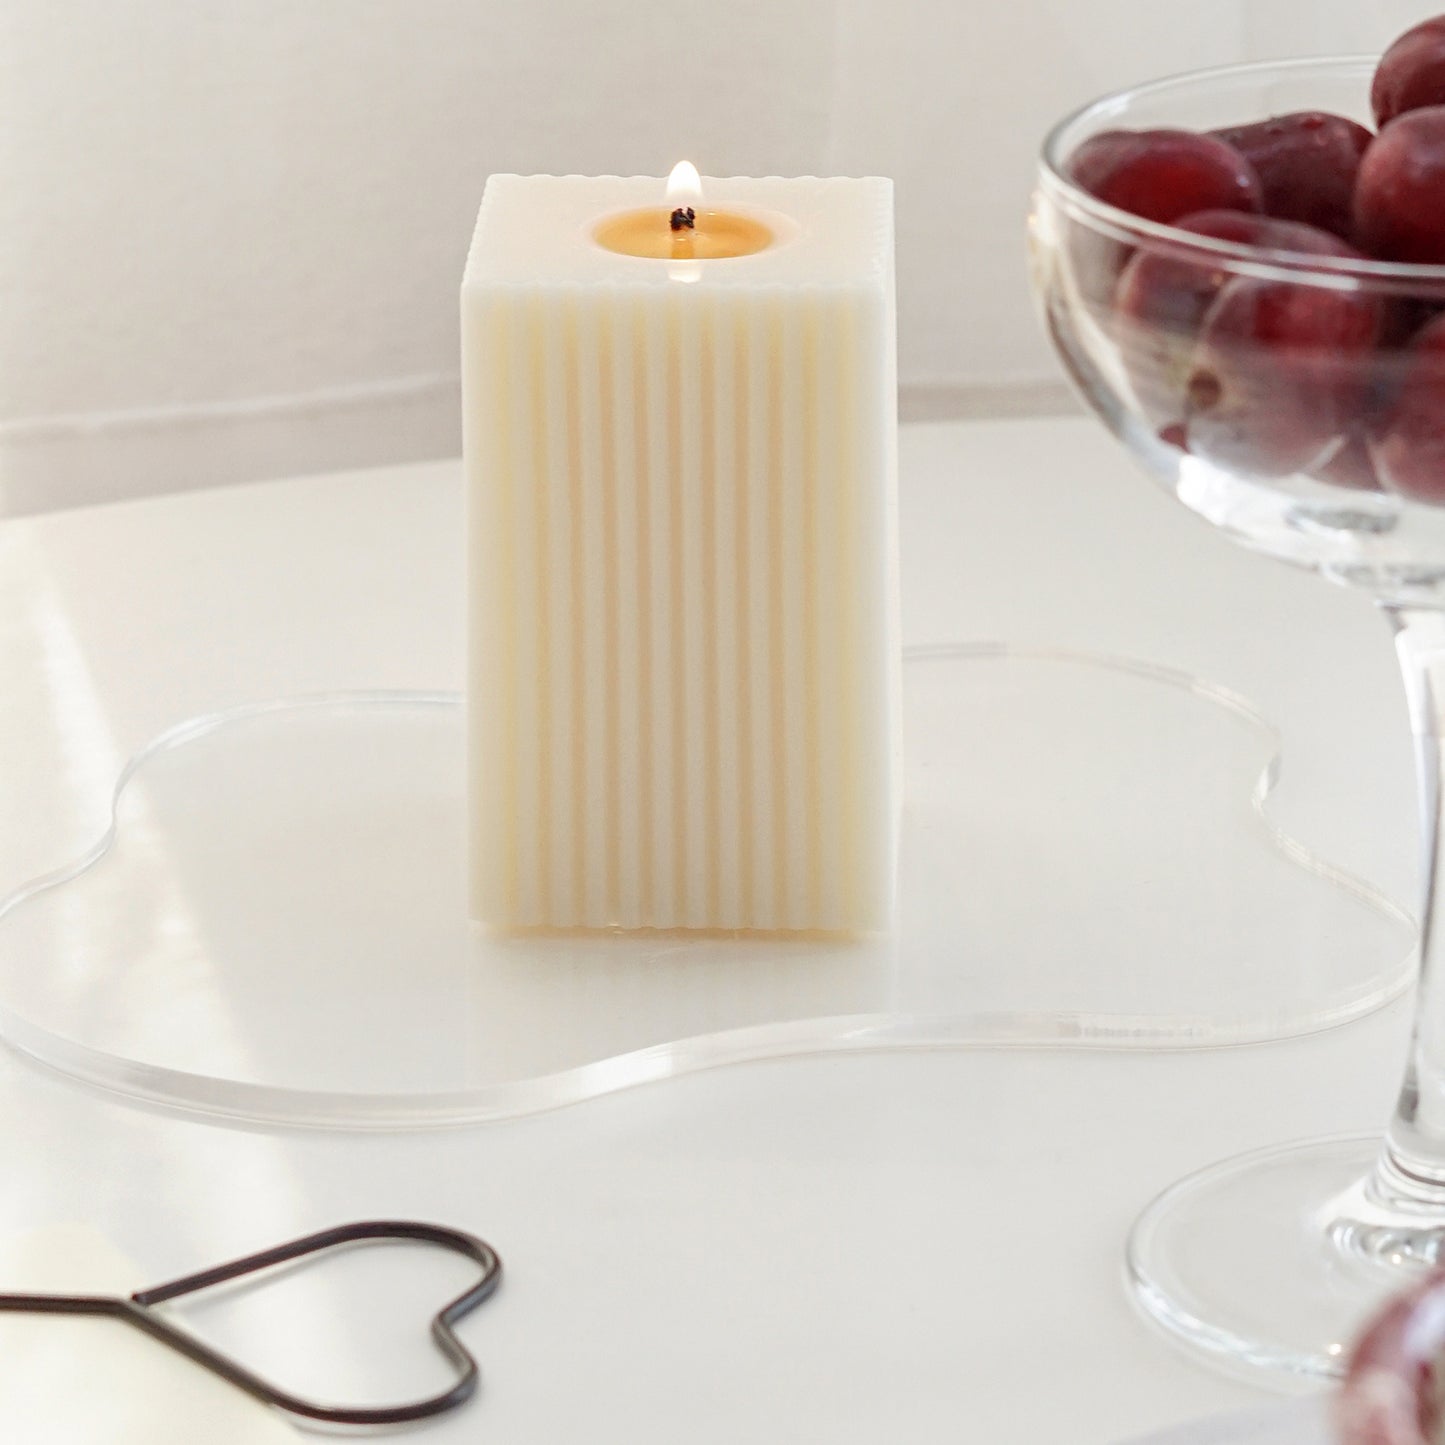 a lit ribbed rectangular soy pillar candle on irregular shape wavy acrylic coaster next to a coupe glass filled with red cherries